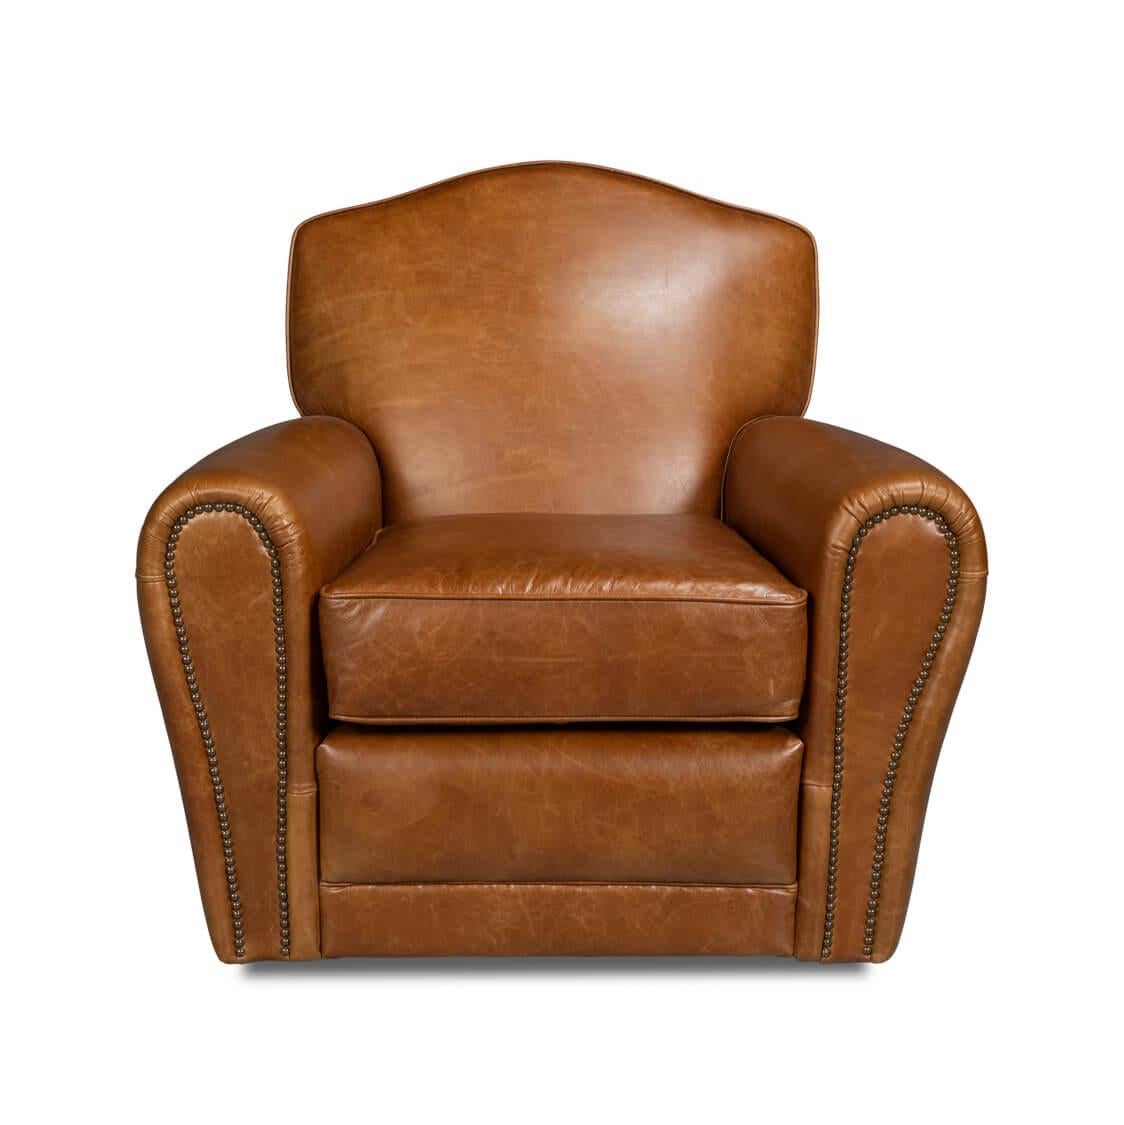 An Art Deco style leather upholstered club chair, in our Vintage Cuba brown leather, with long rolled arms, a padded seat back, and cushions, with detailed nailhead trim and raised on a swivel base.
Dimensions: 36